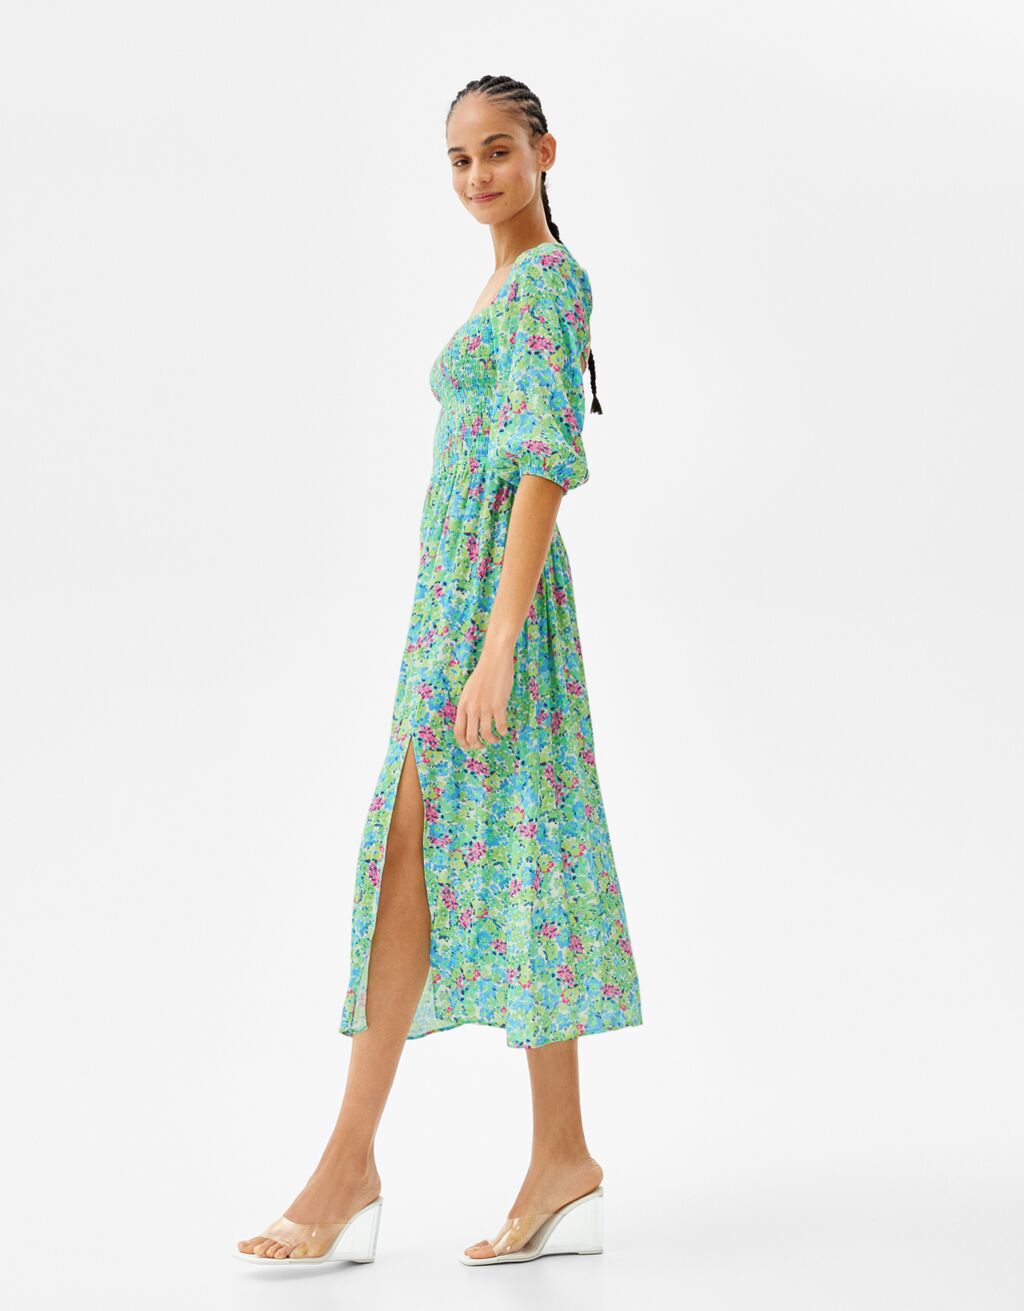 Long floral print dress with long sleeves and tied back